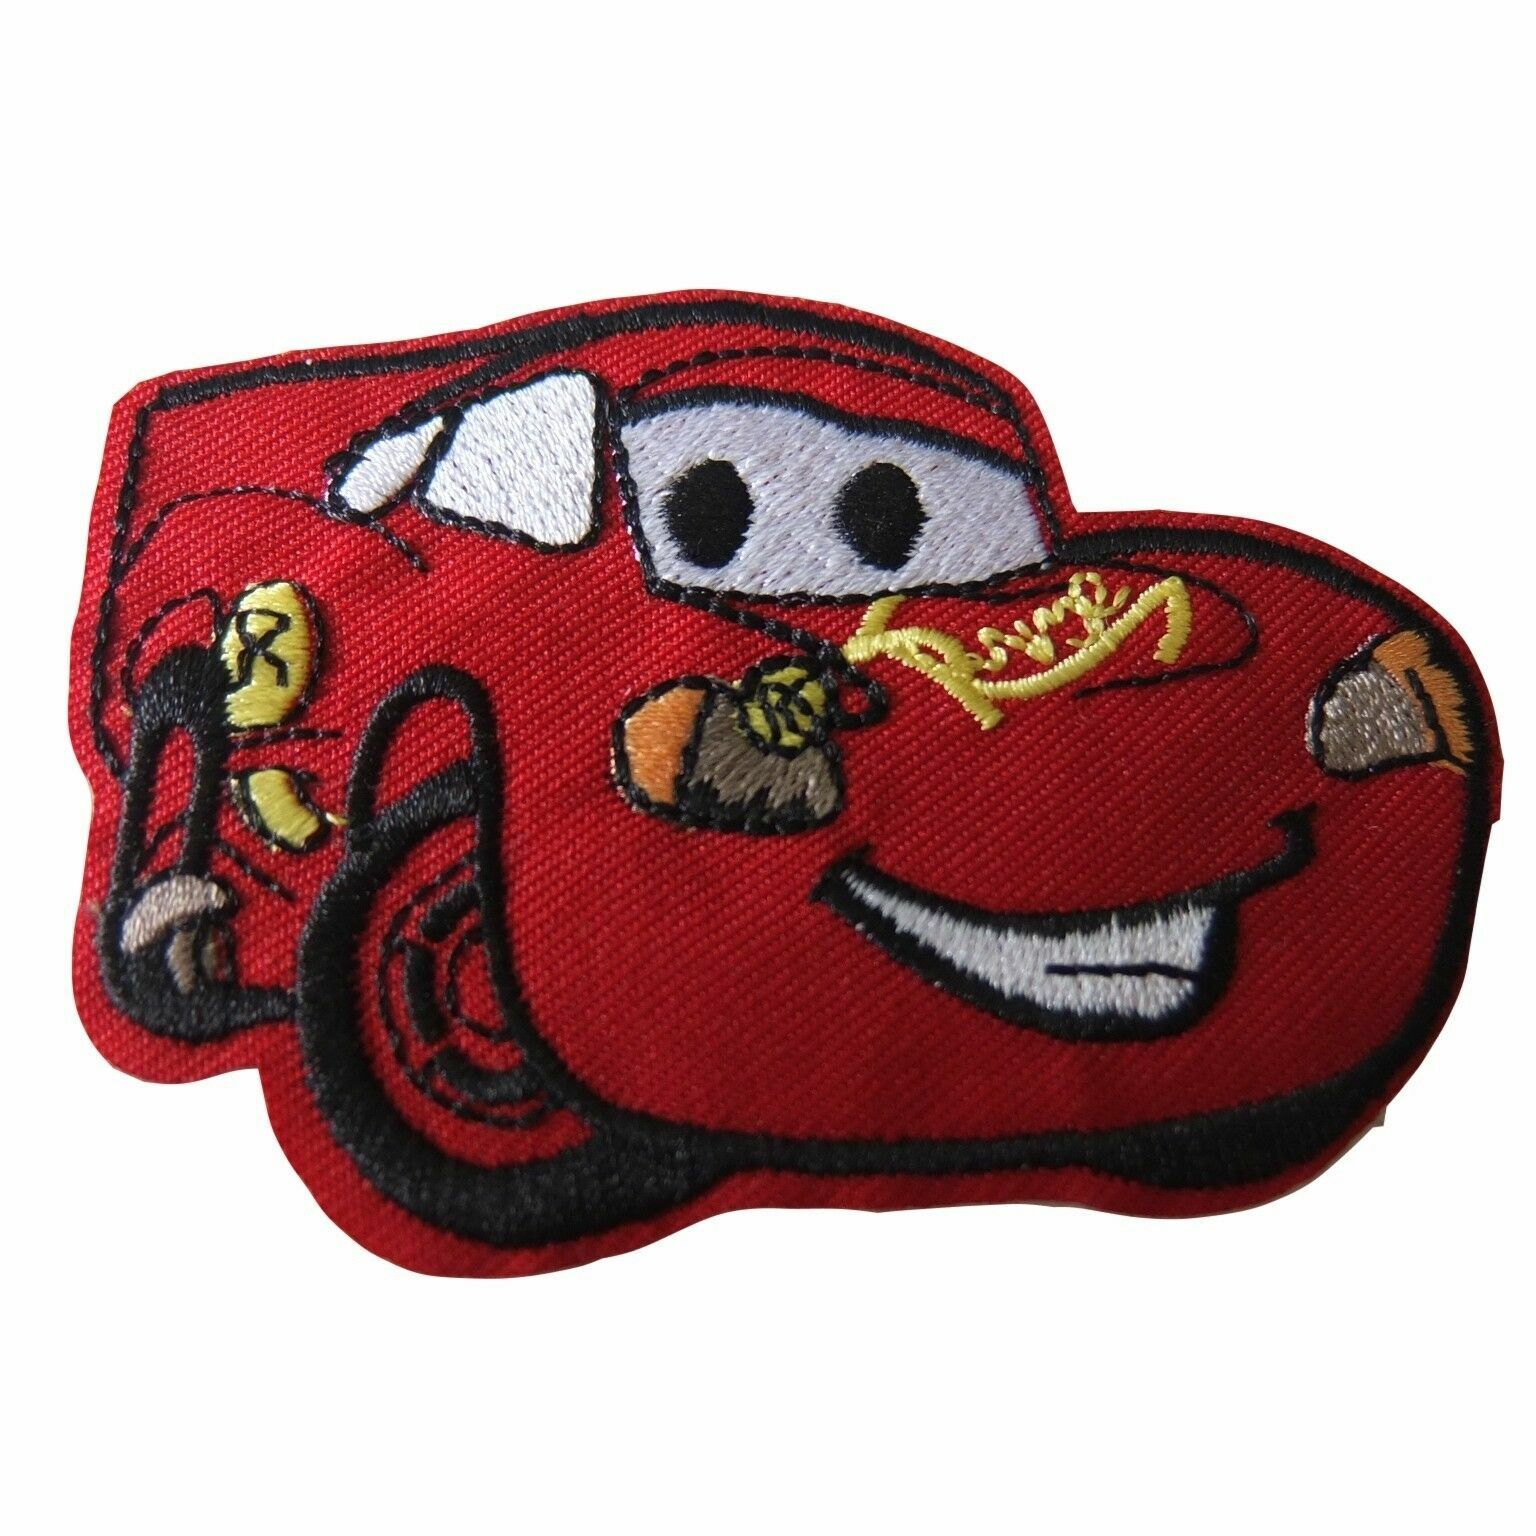 Cars Movie Lightning McQueen Character Embroidered Iron on Patch | eBay